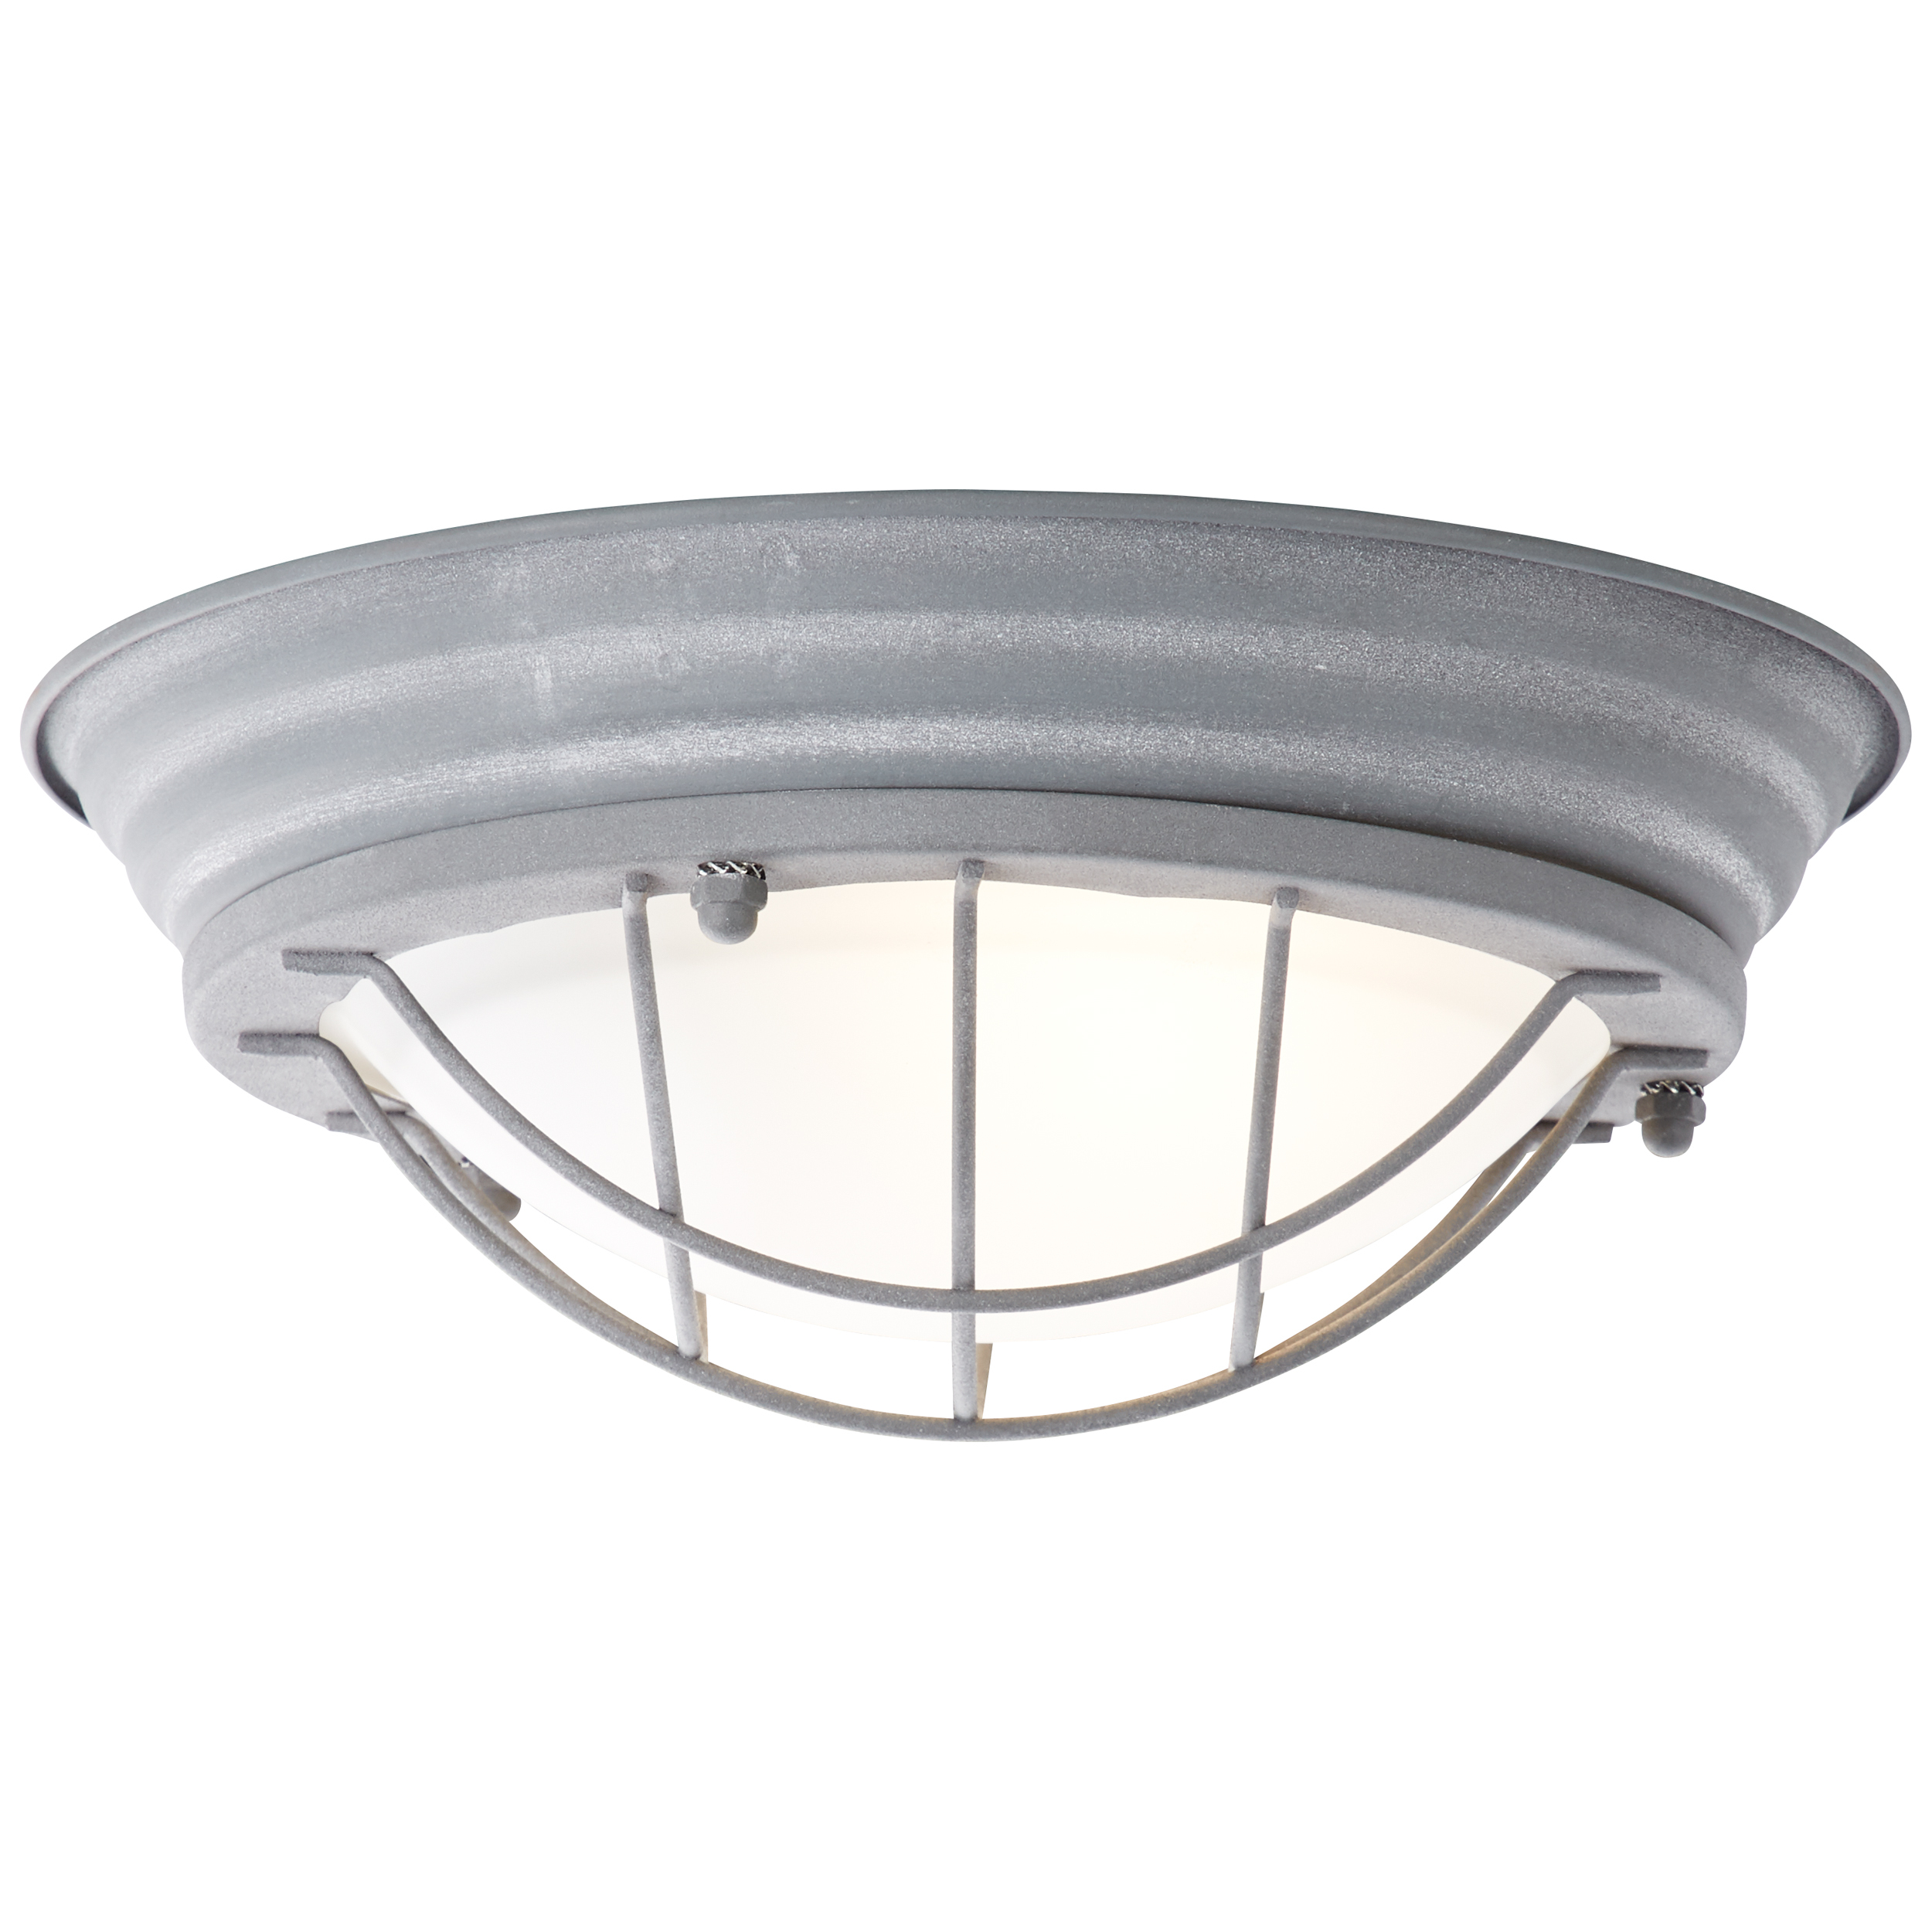 Typhoon wall and ceiling light 29cm grey concrete/white